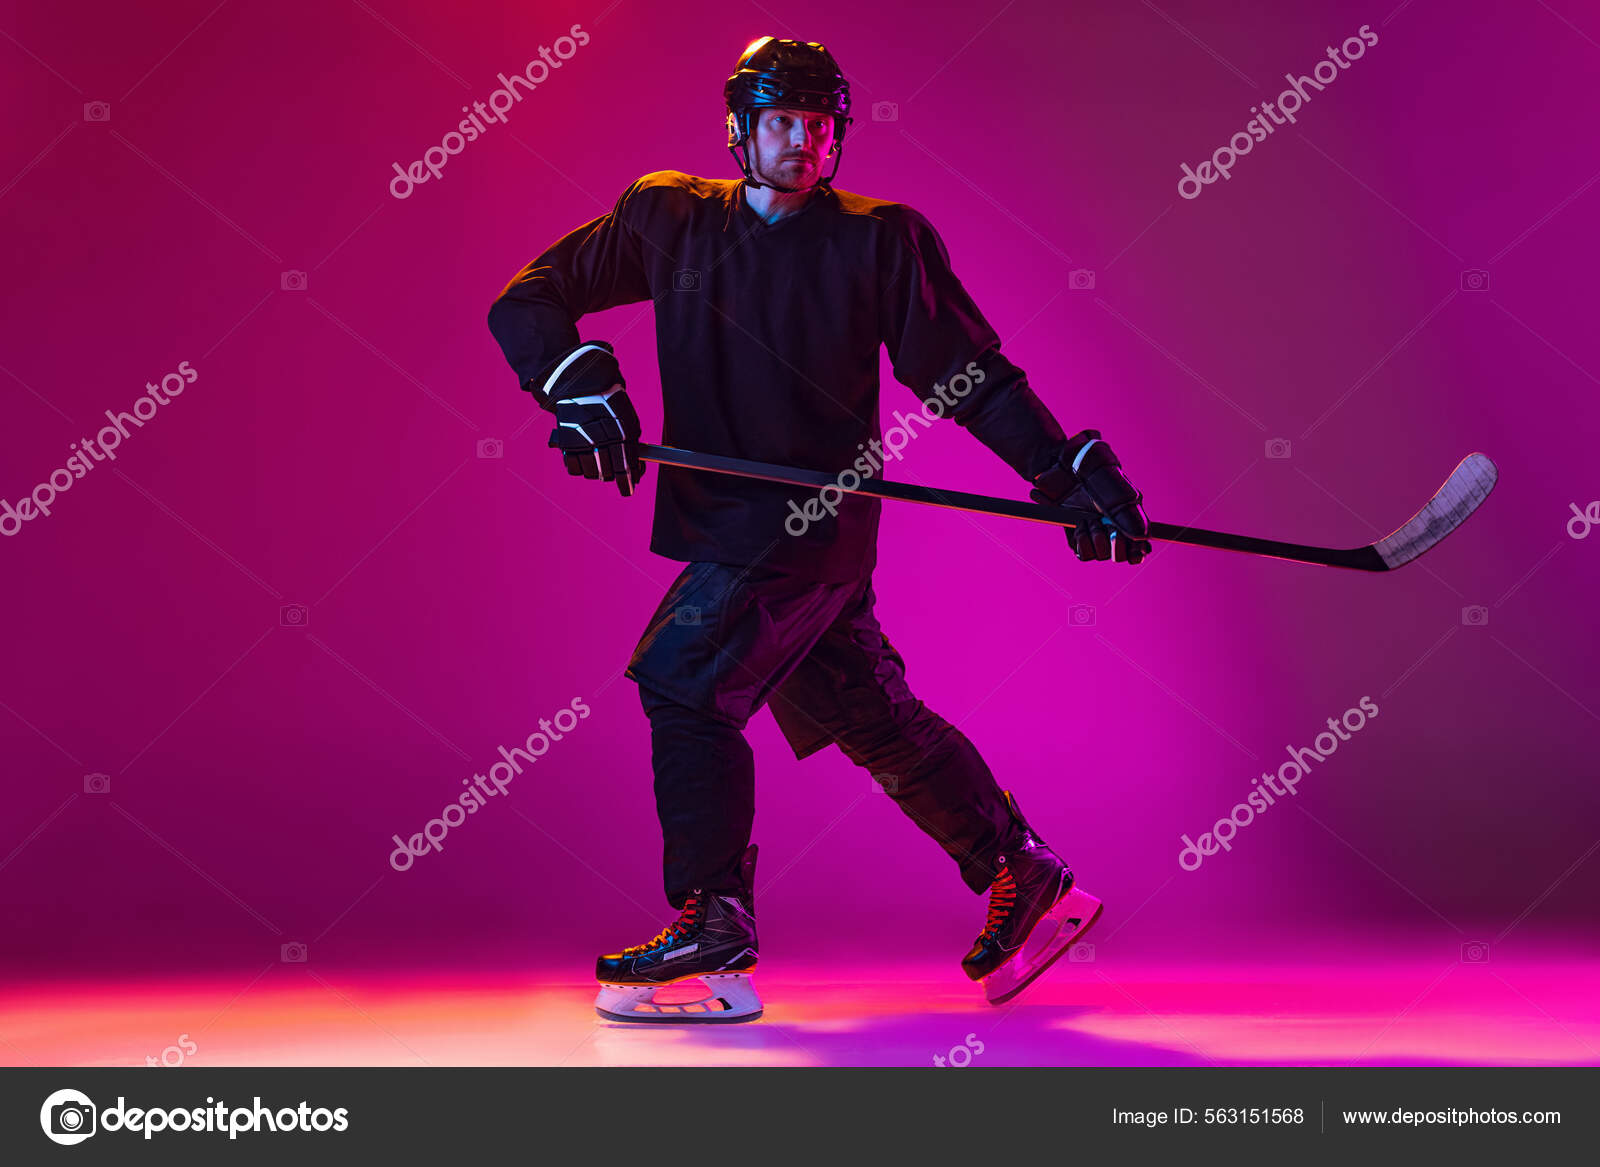 Man, professional hockey player training in special uniform with helmet isolated over pink background in neon